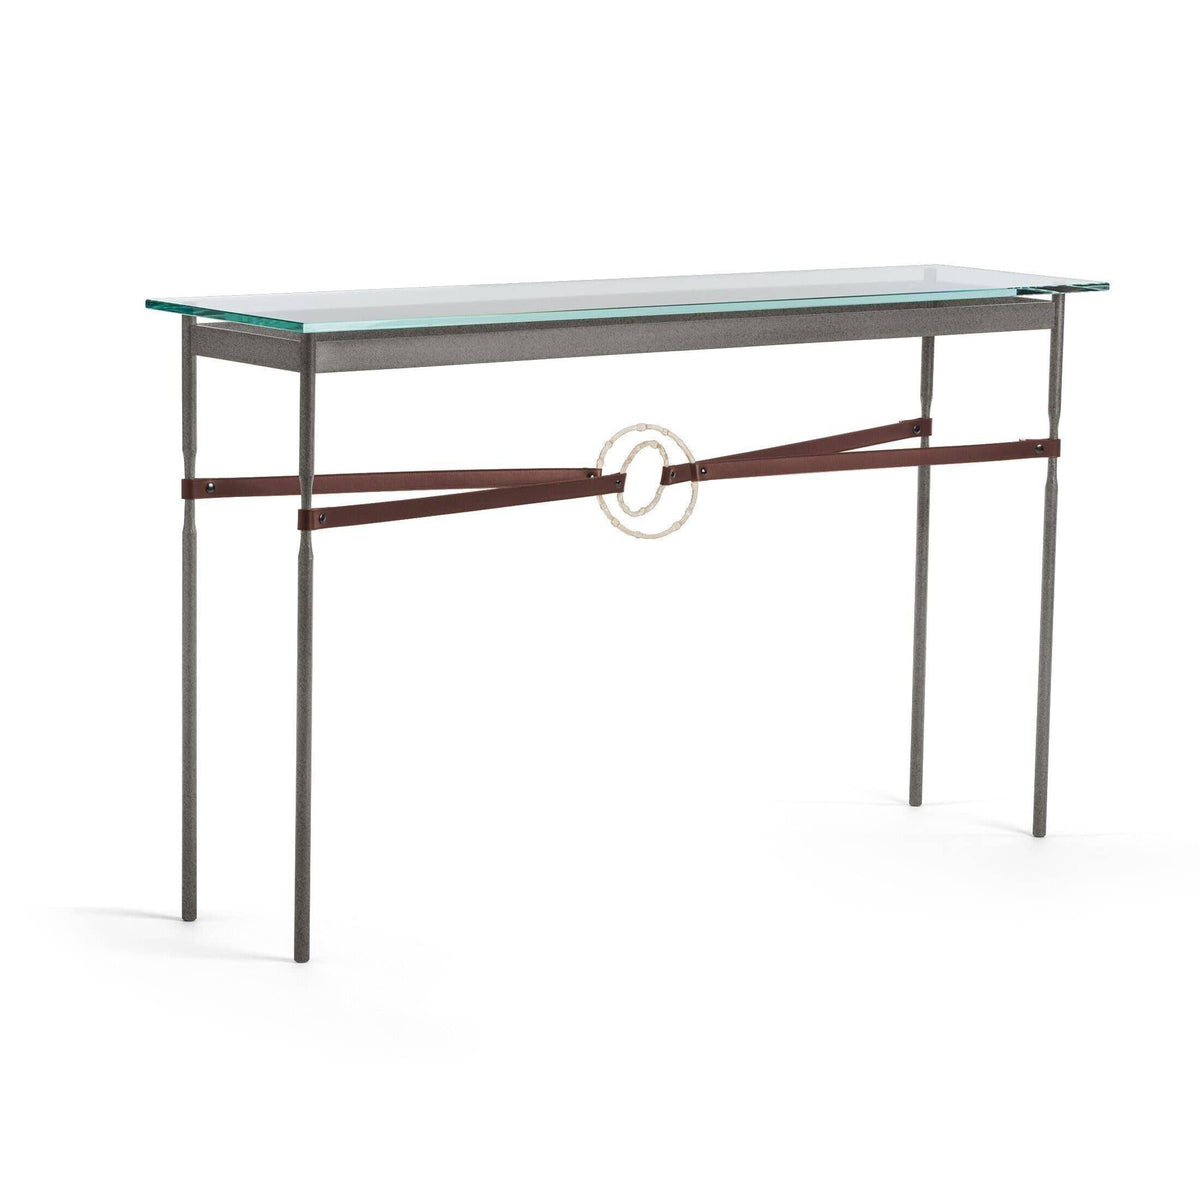 Hubbardton Forge - Equus Brown Leather Console Table - 750118-20-84-LB-VA0714 | Montreal Lighting & Hardware